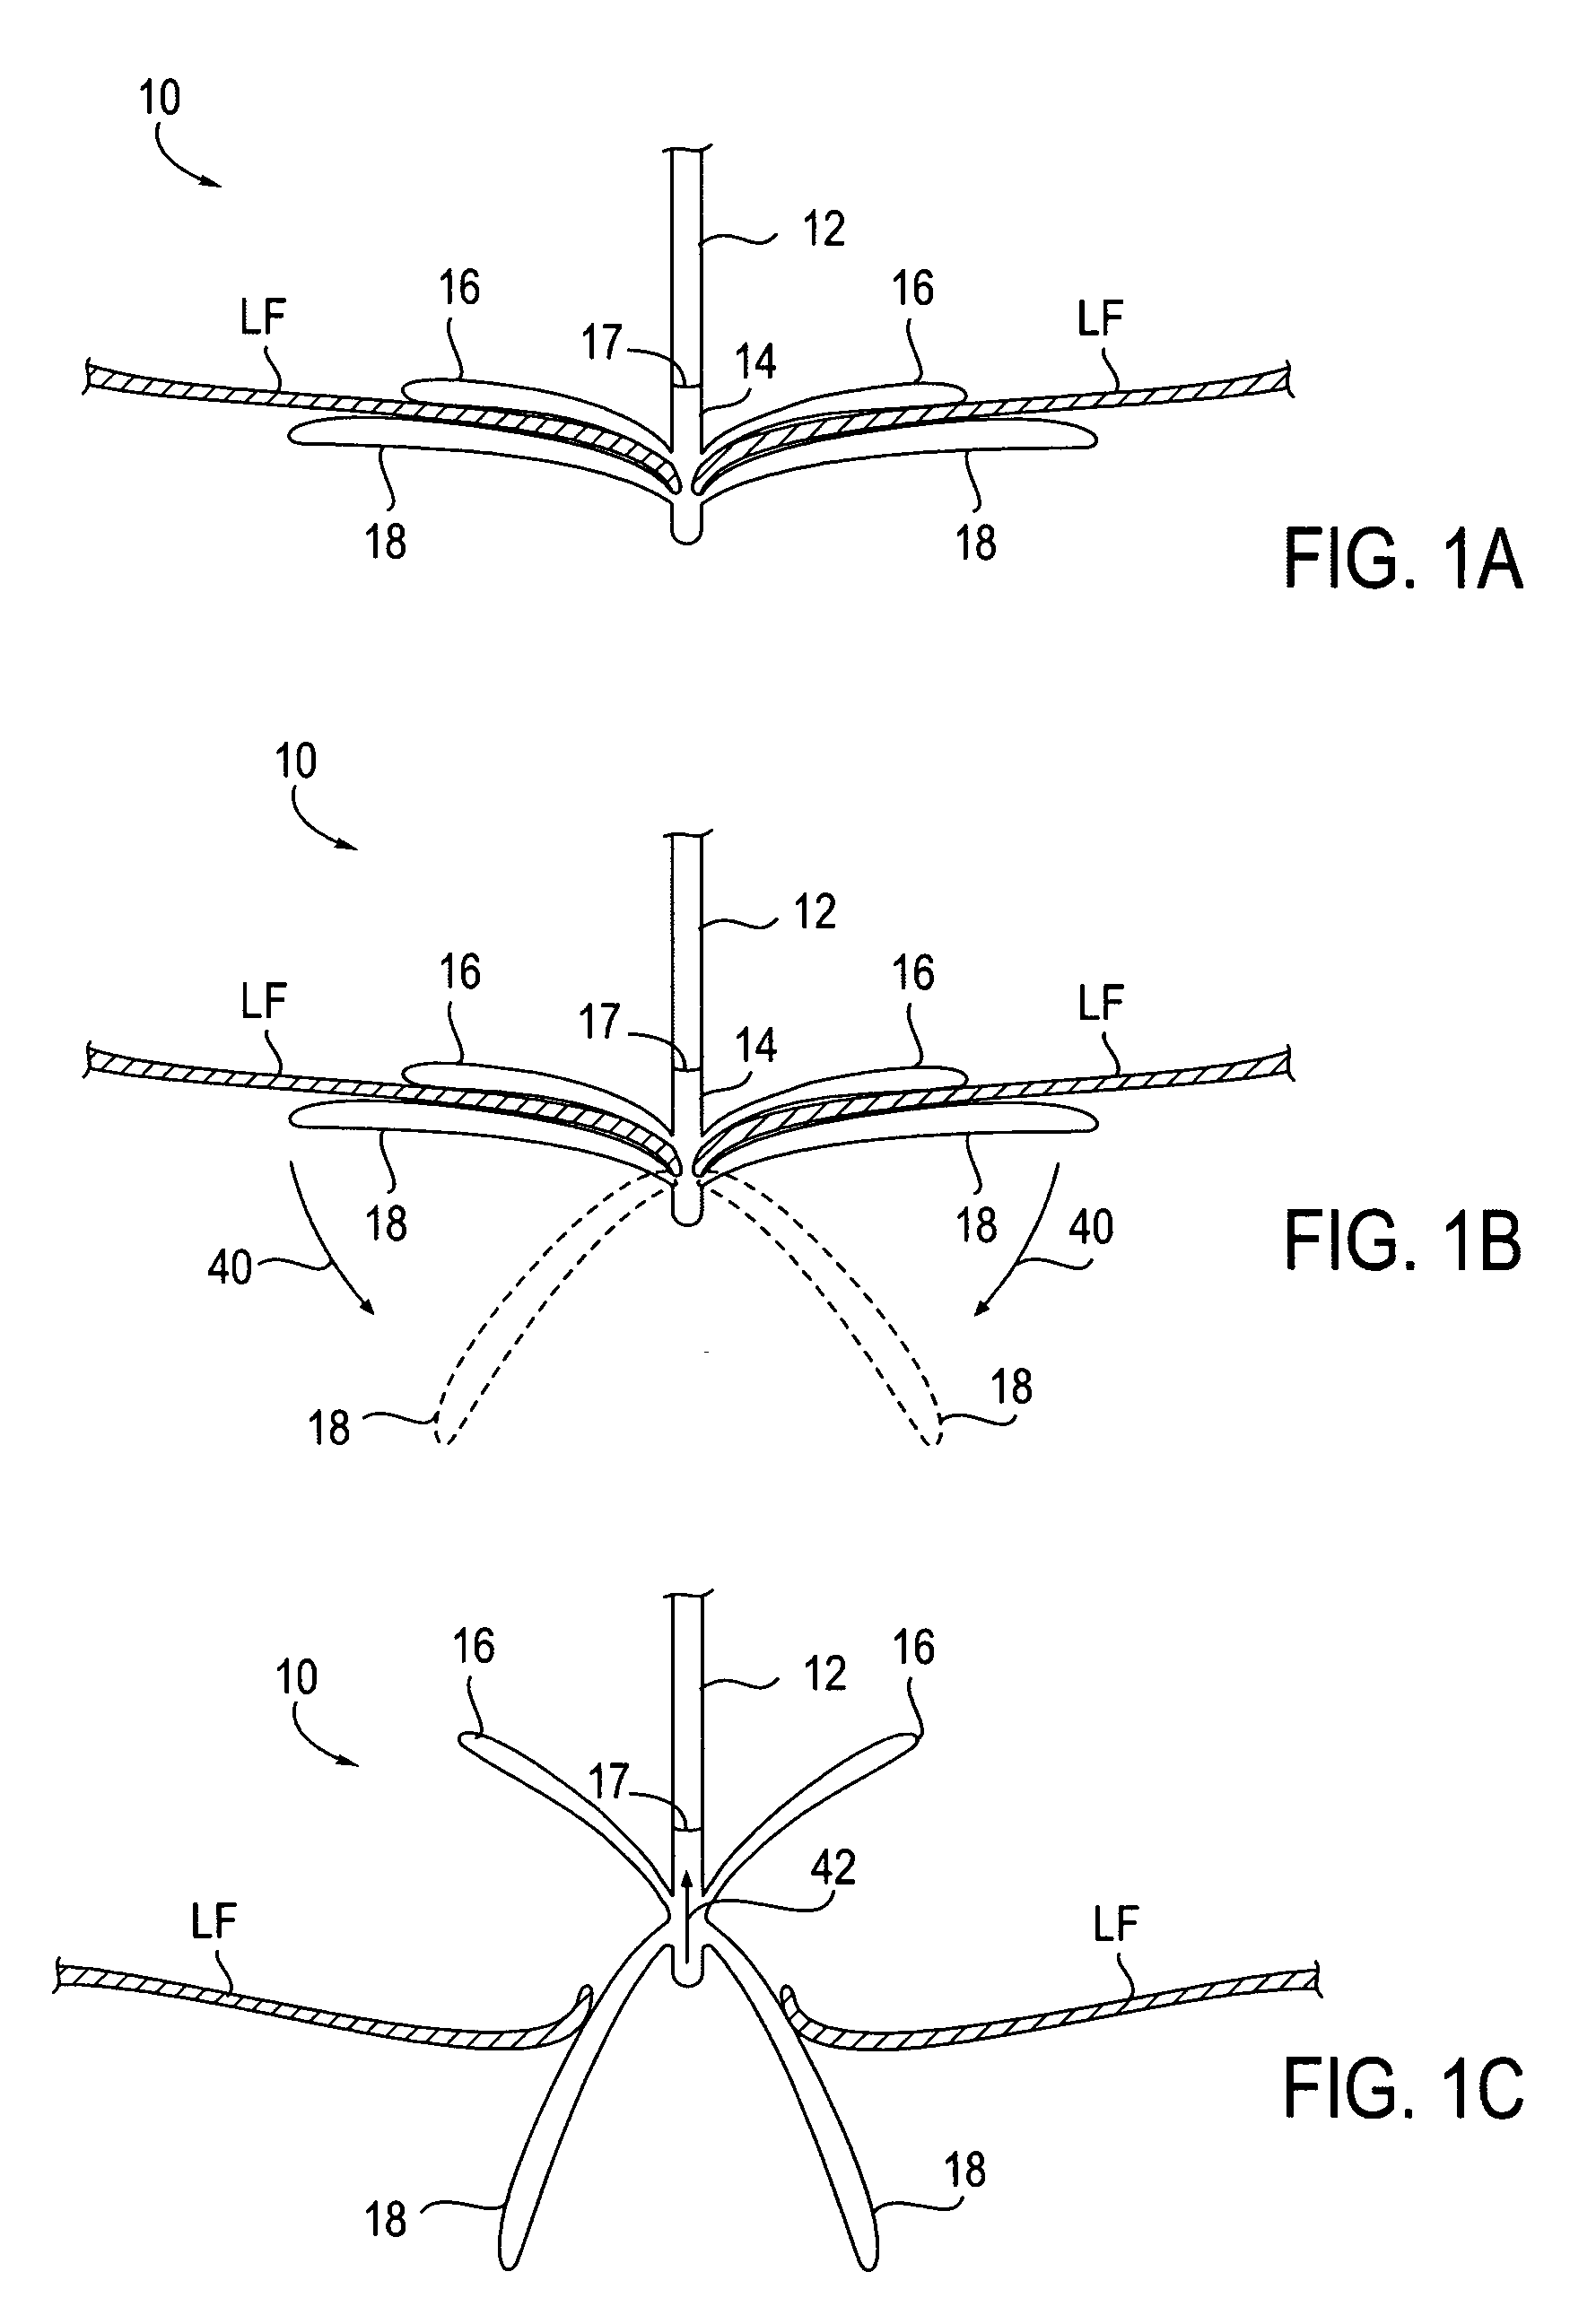 Fixation devices for variation in engagement of tissue